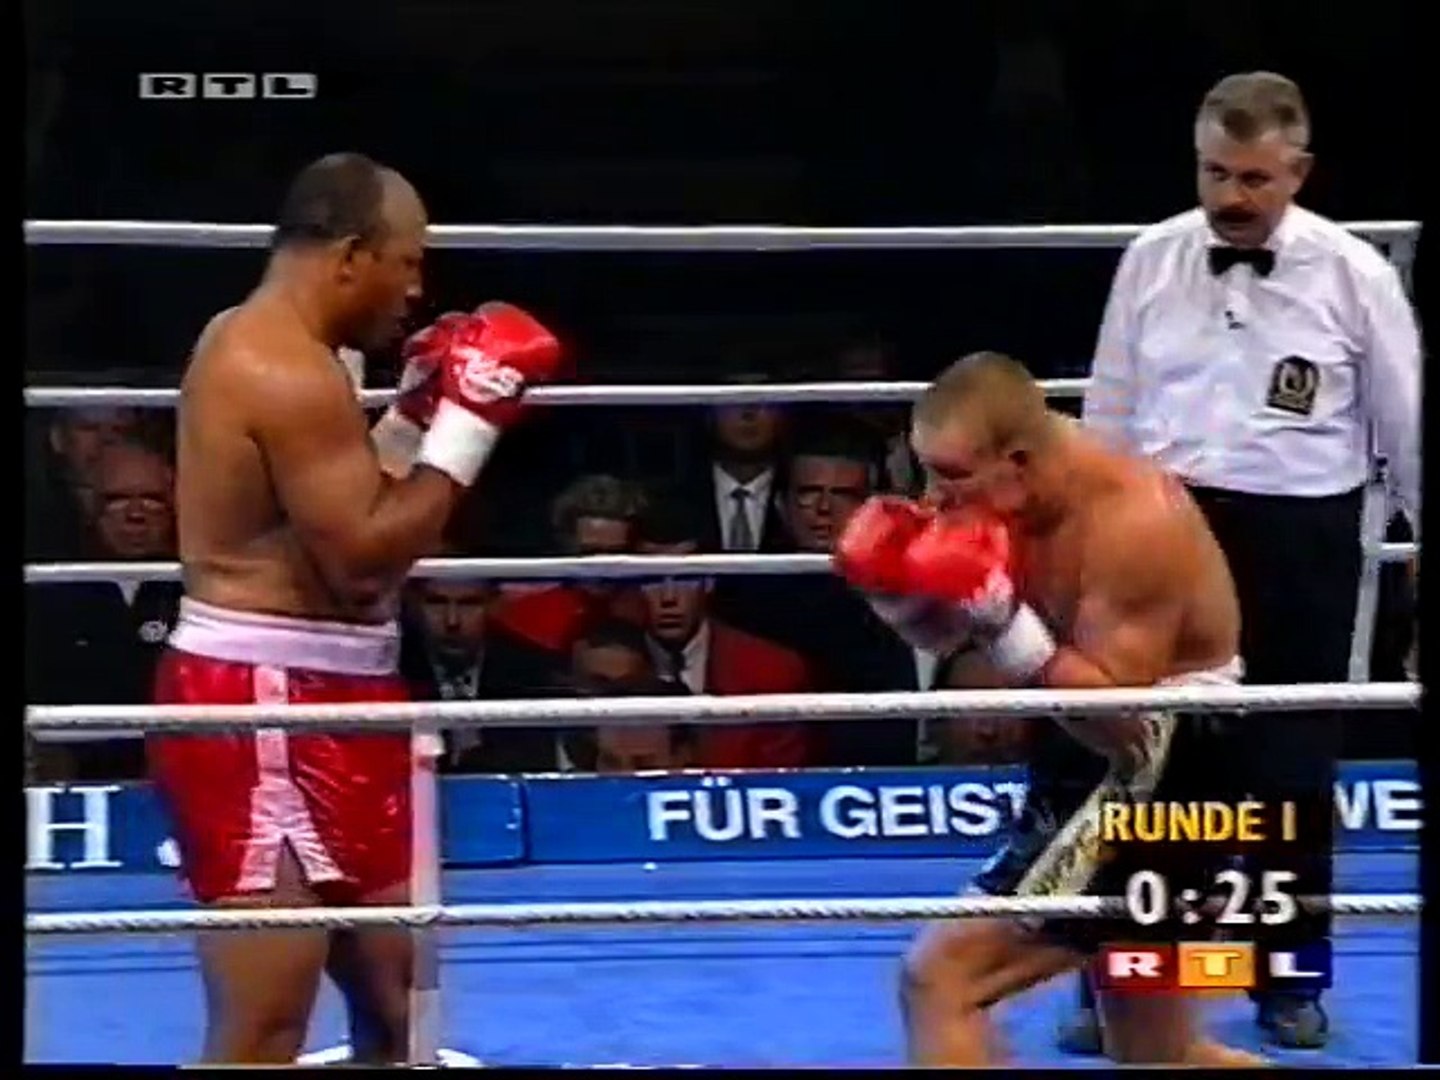 Axel Schulz Vs James Smith 17 09 1994 Full Fight Video Dailymotion